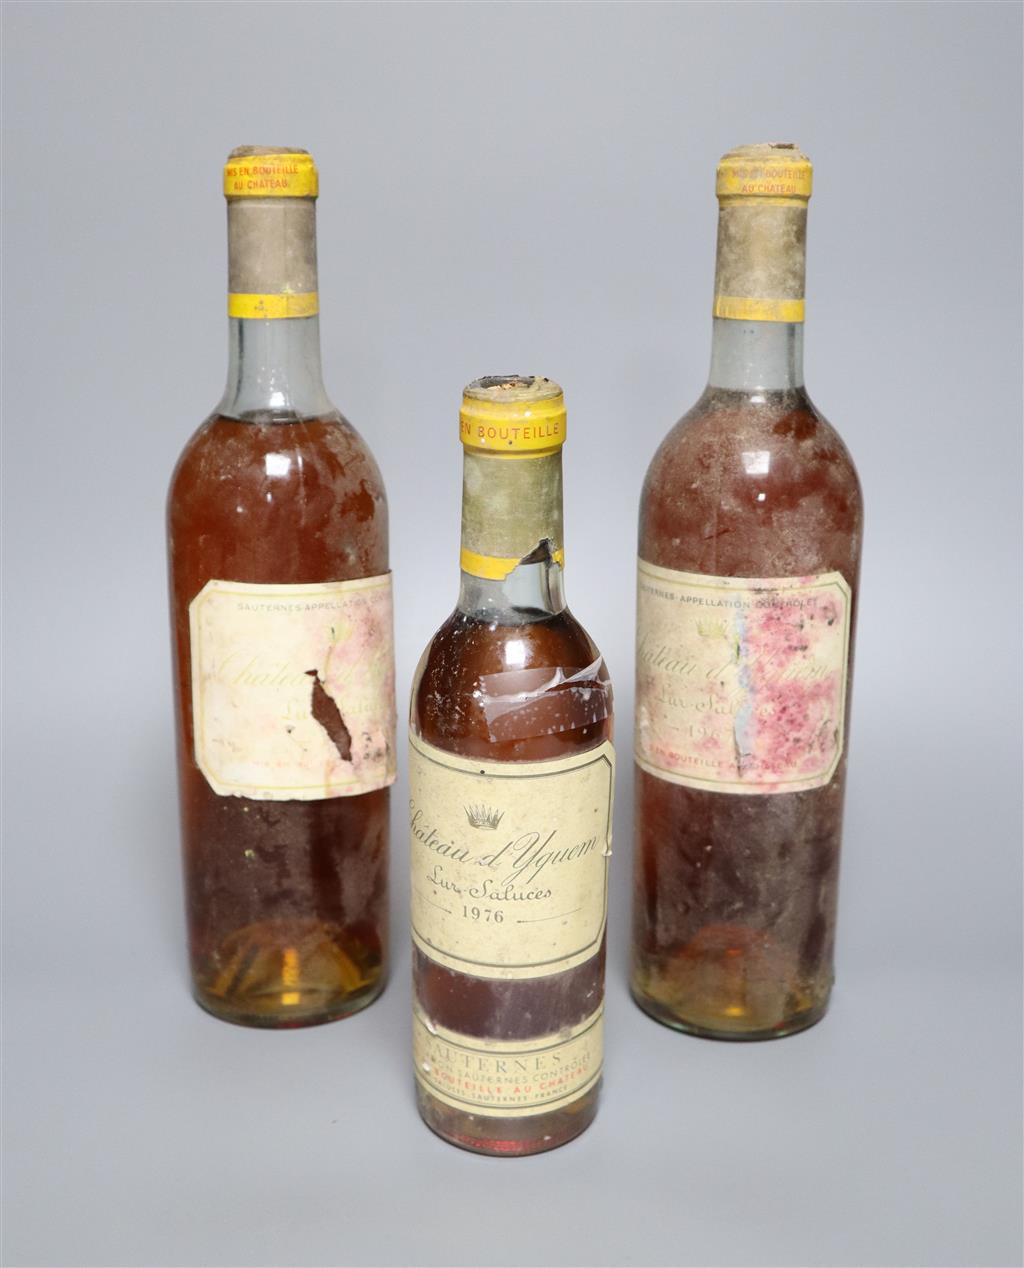 Two bottles of chateau DYquem sauternes 1967-1965, and a 375ml bottle